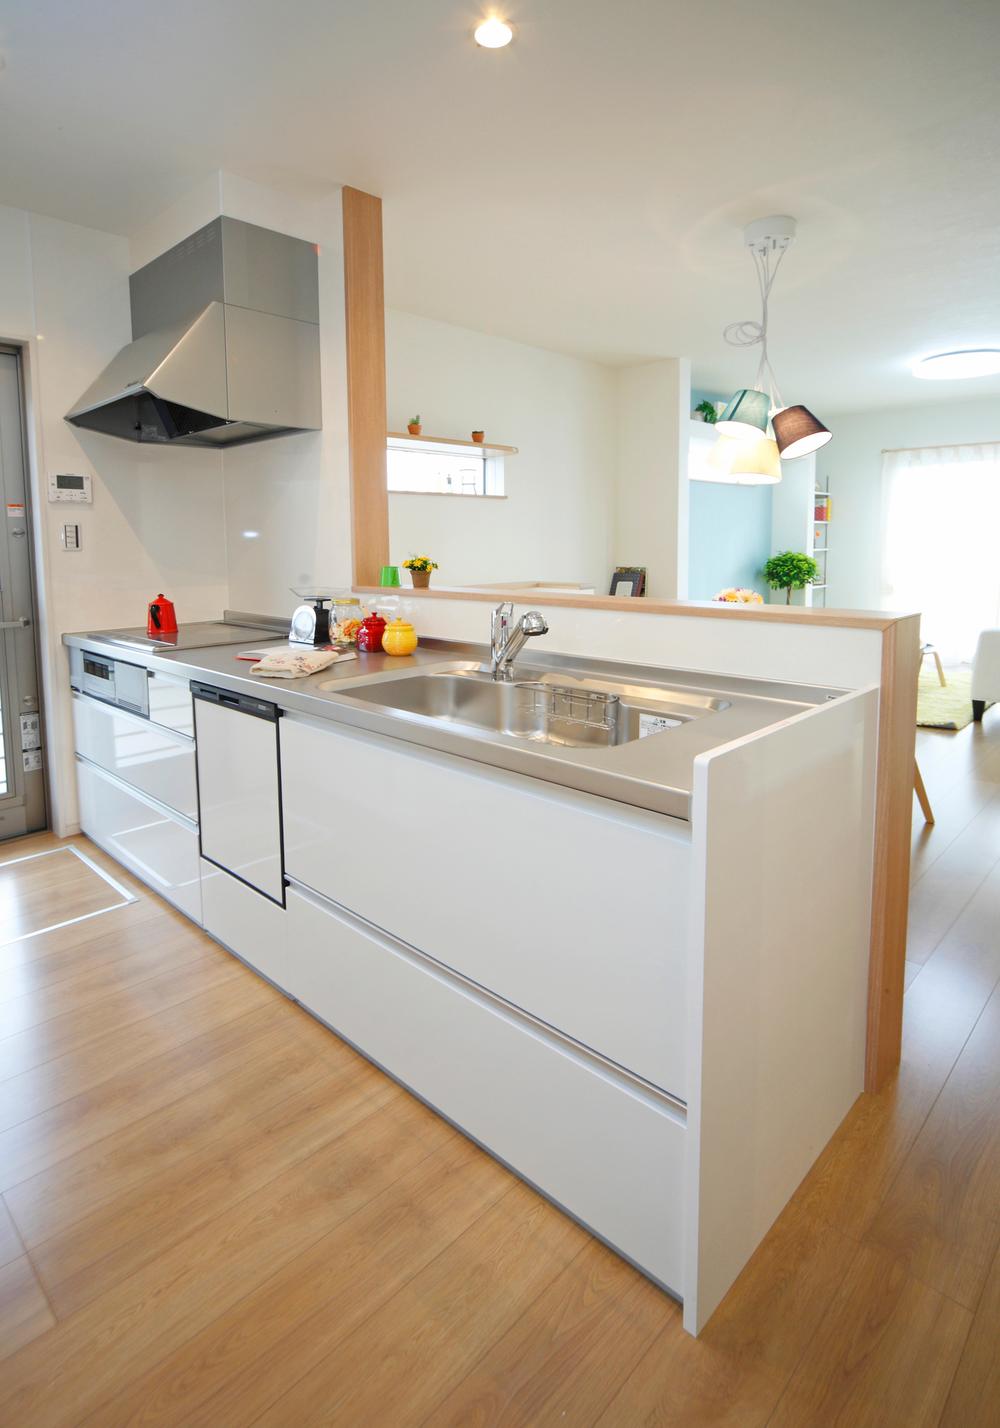 Kitchen. Open kitchen that communication with family deepens. Equipped with IH cooking heater and dishwasher, Housework flow line is also a kitchen that takes into account.